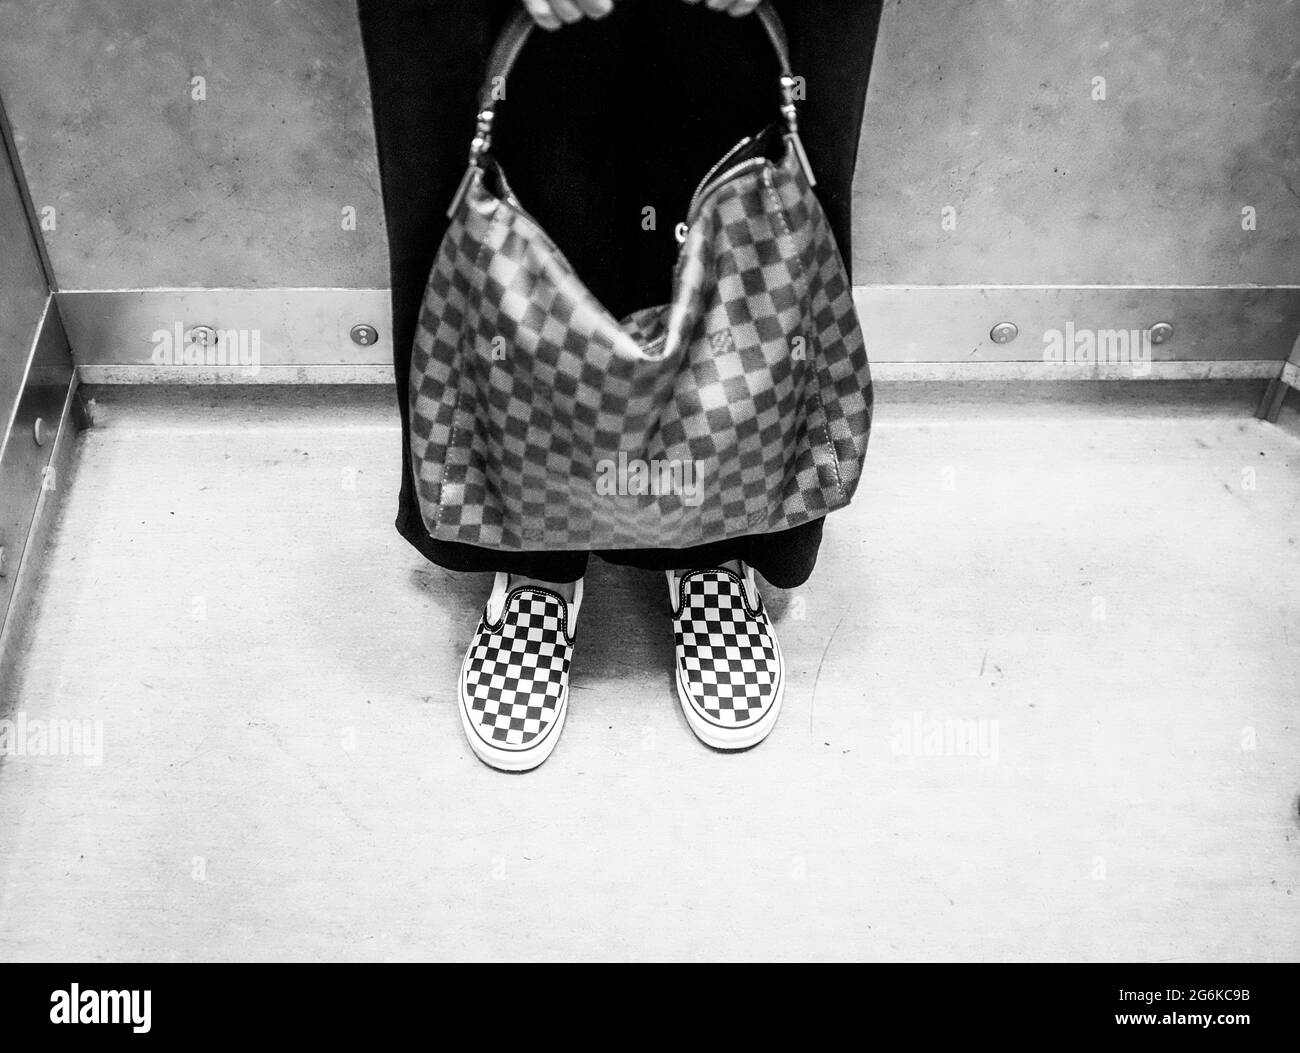 Vuitton Black and White Stock Photos & Images - Alamy